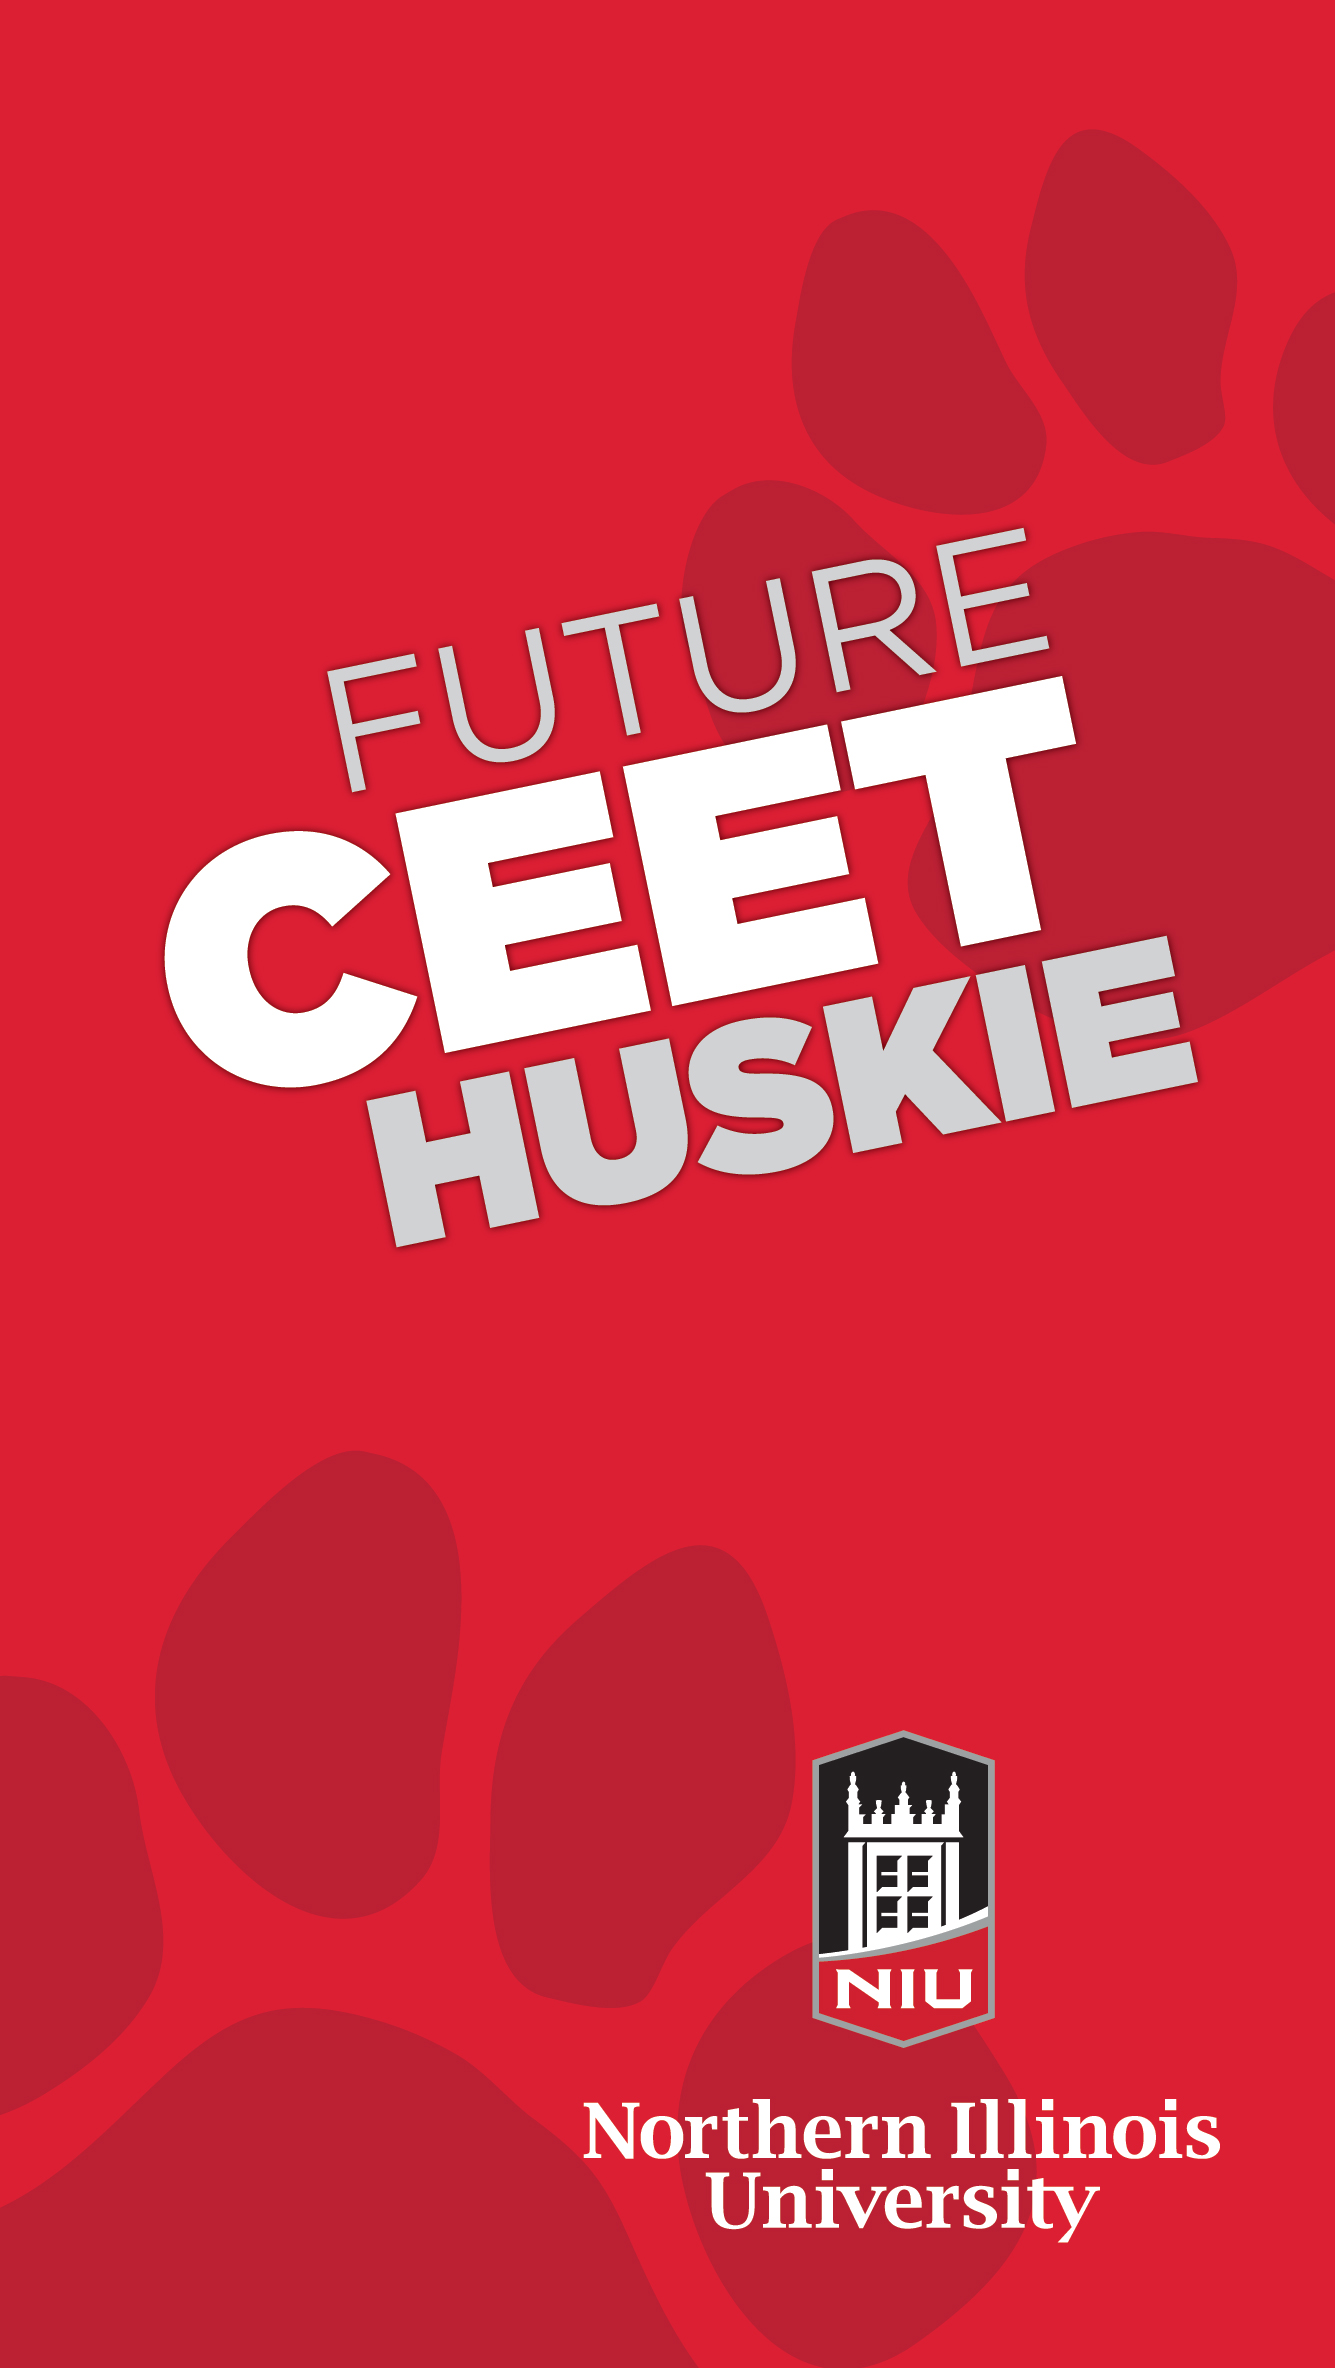 Future CEET Huskie - Red for iPhone